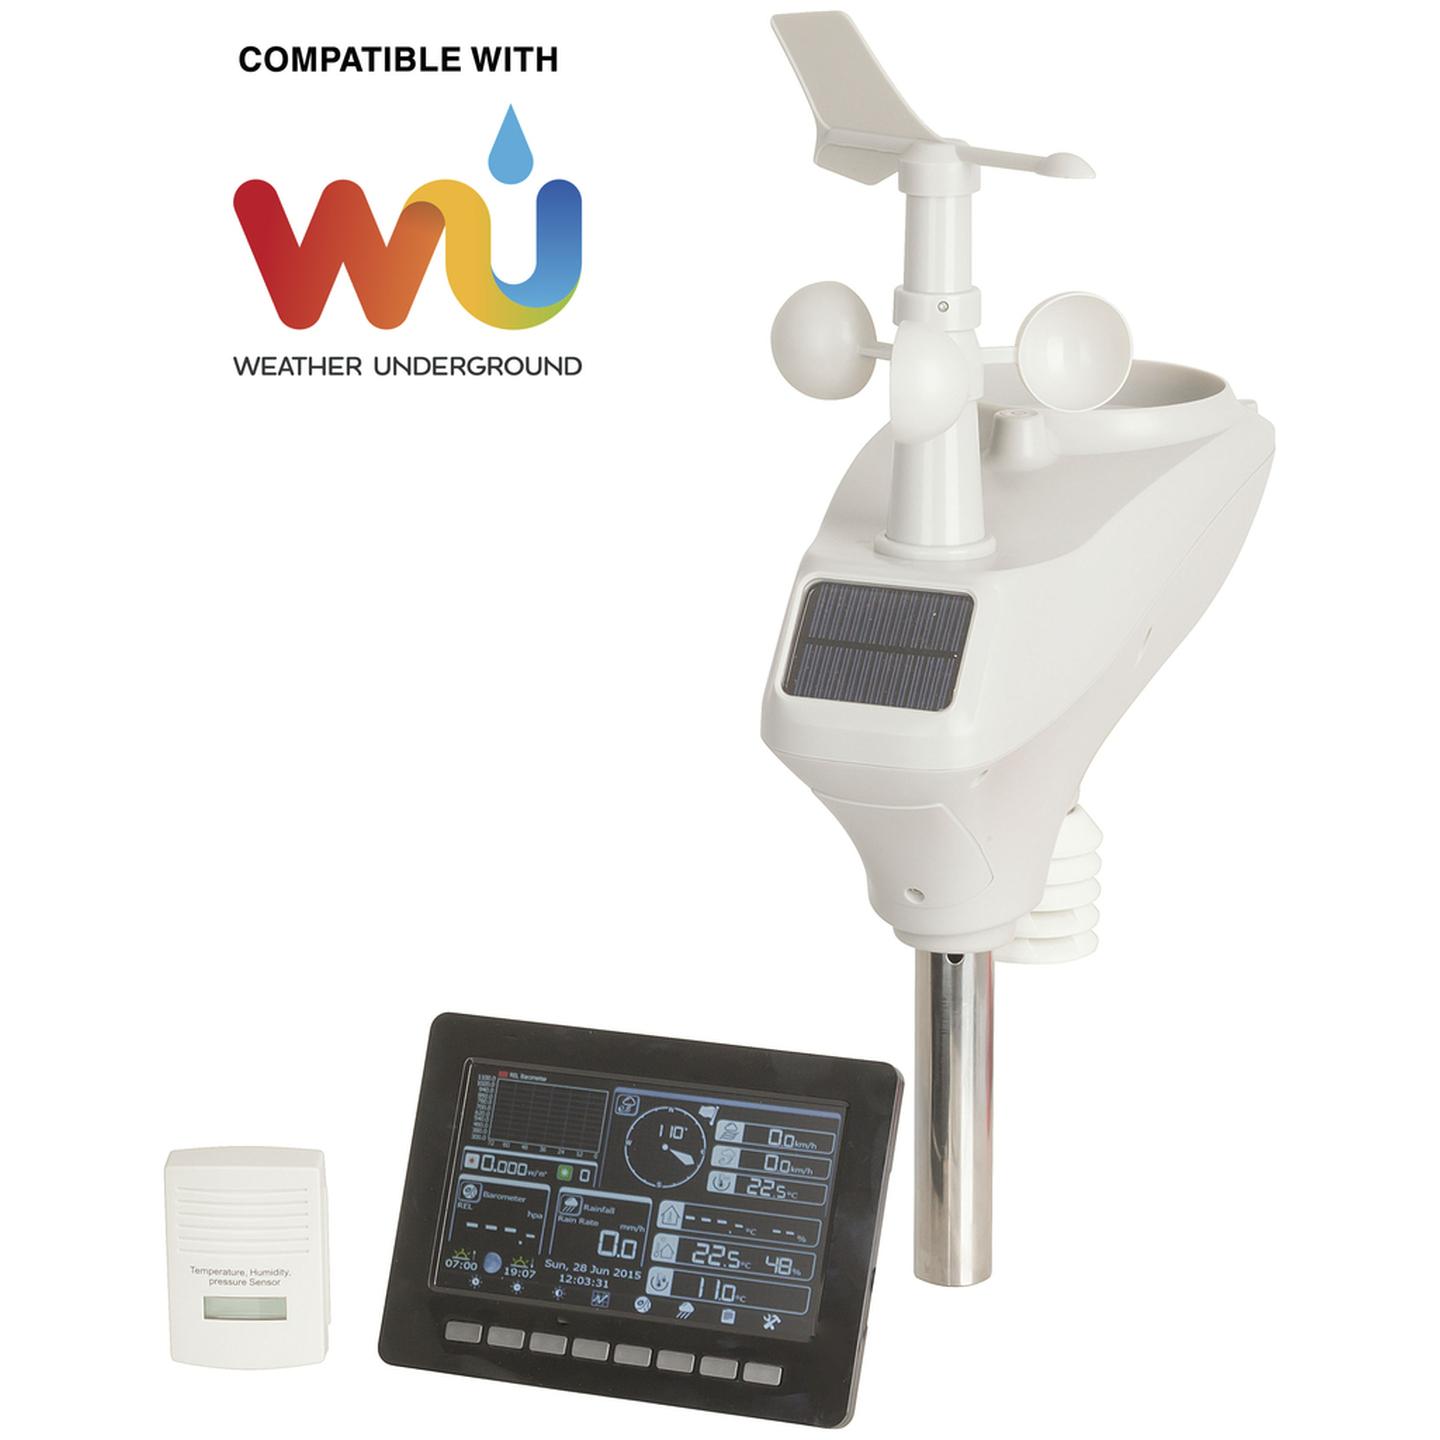 Wi-Fi Wireless Station with 7 LCD Display